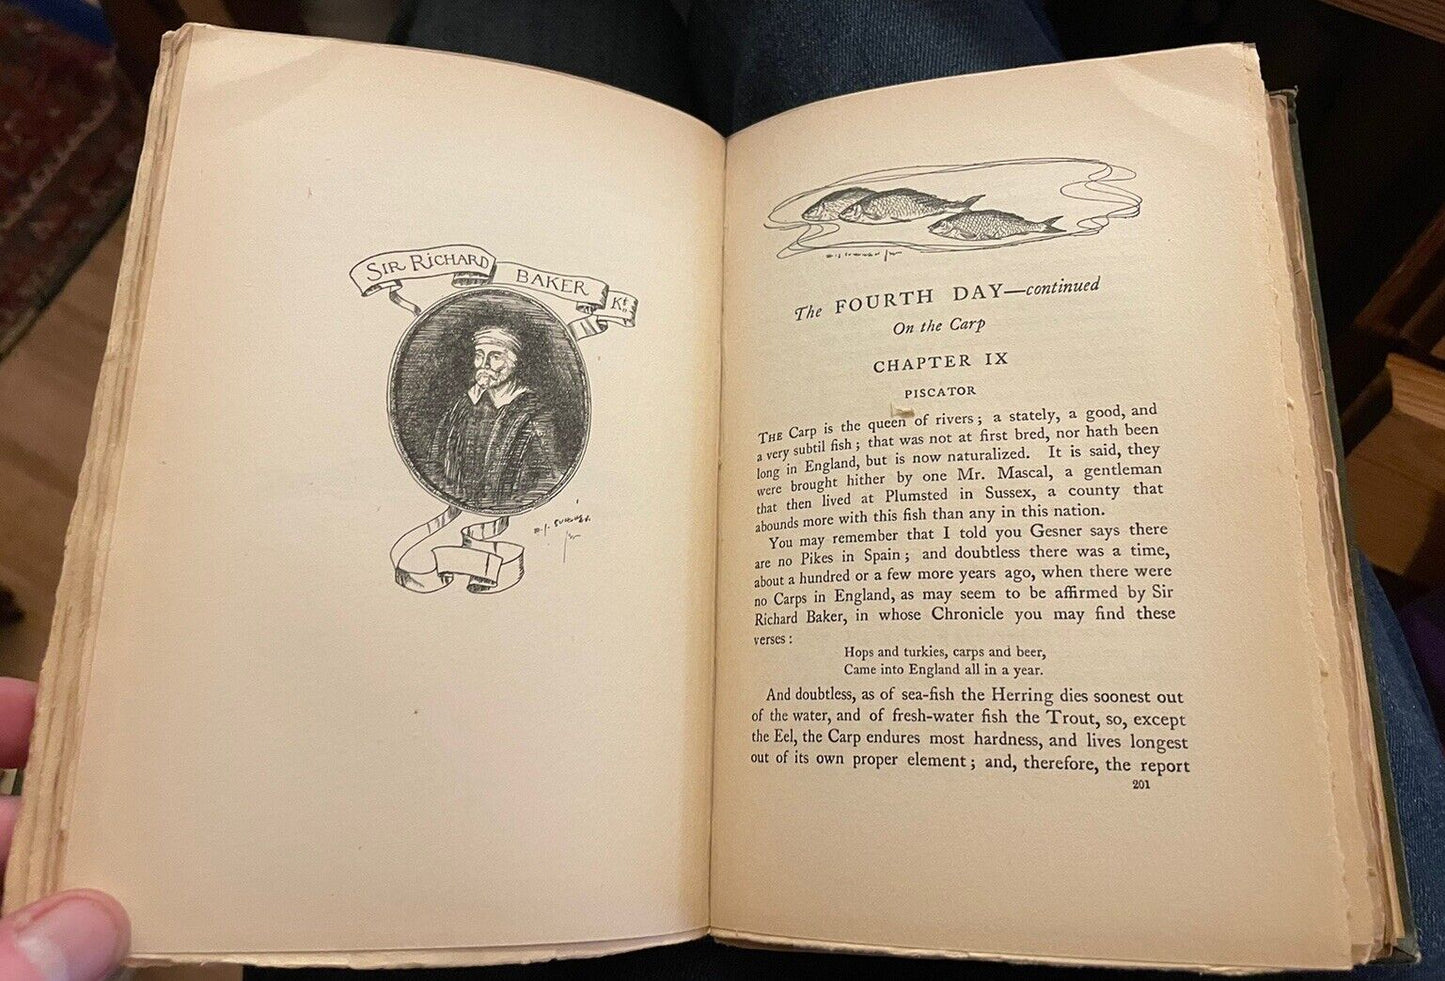 1896 The Compleat Angler : Izaak Walton : Attractive Antique Copy : Classic Fishing Title